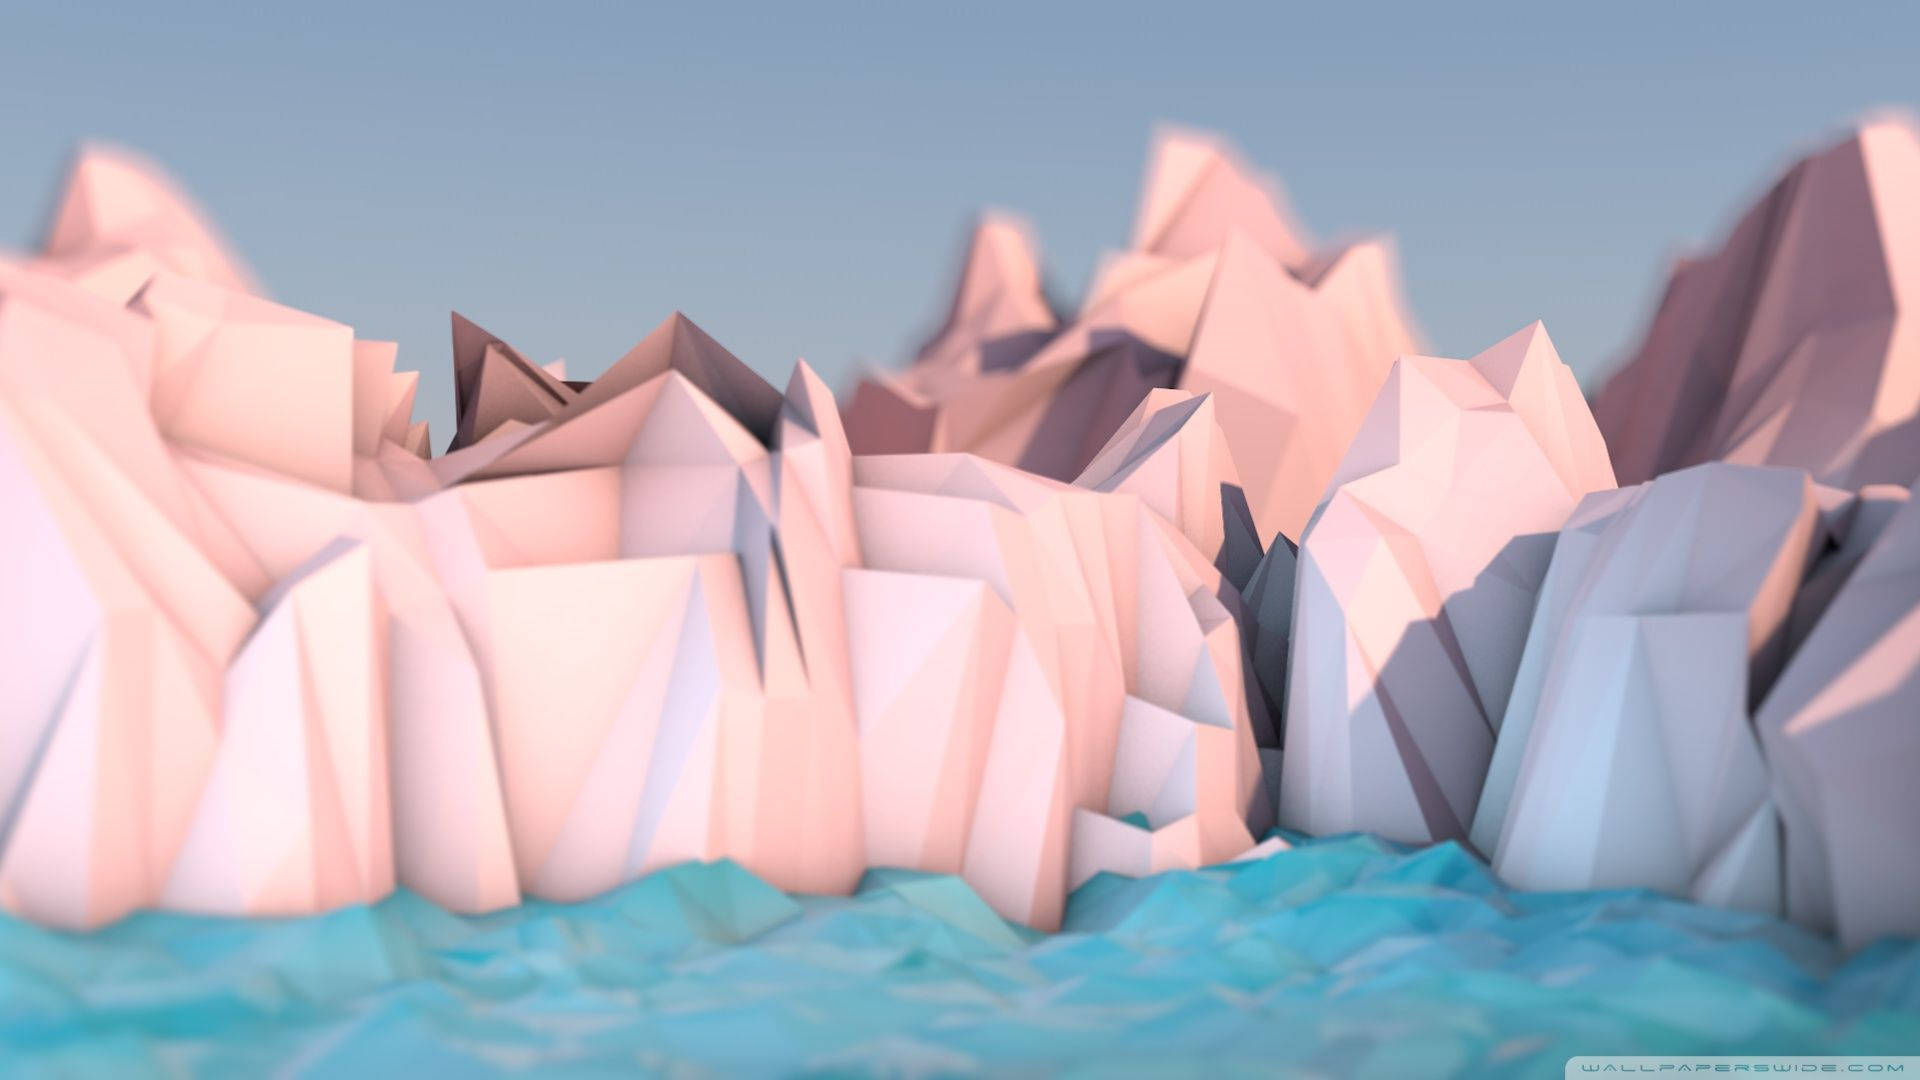 Light-colored Low Poly Mountains Background